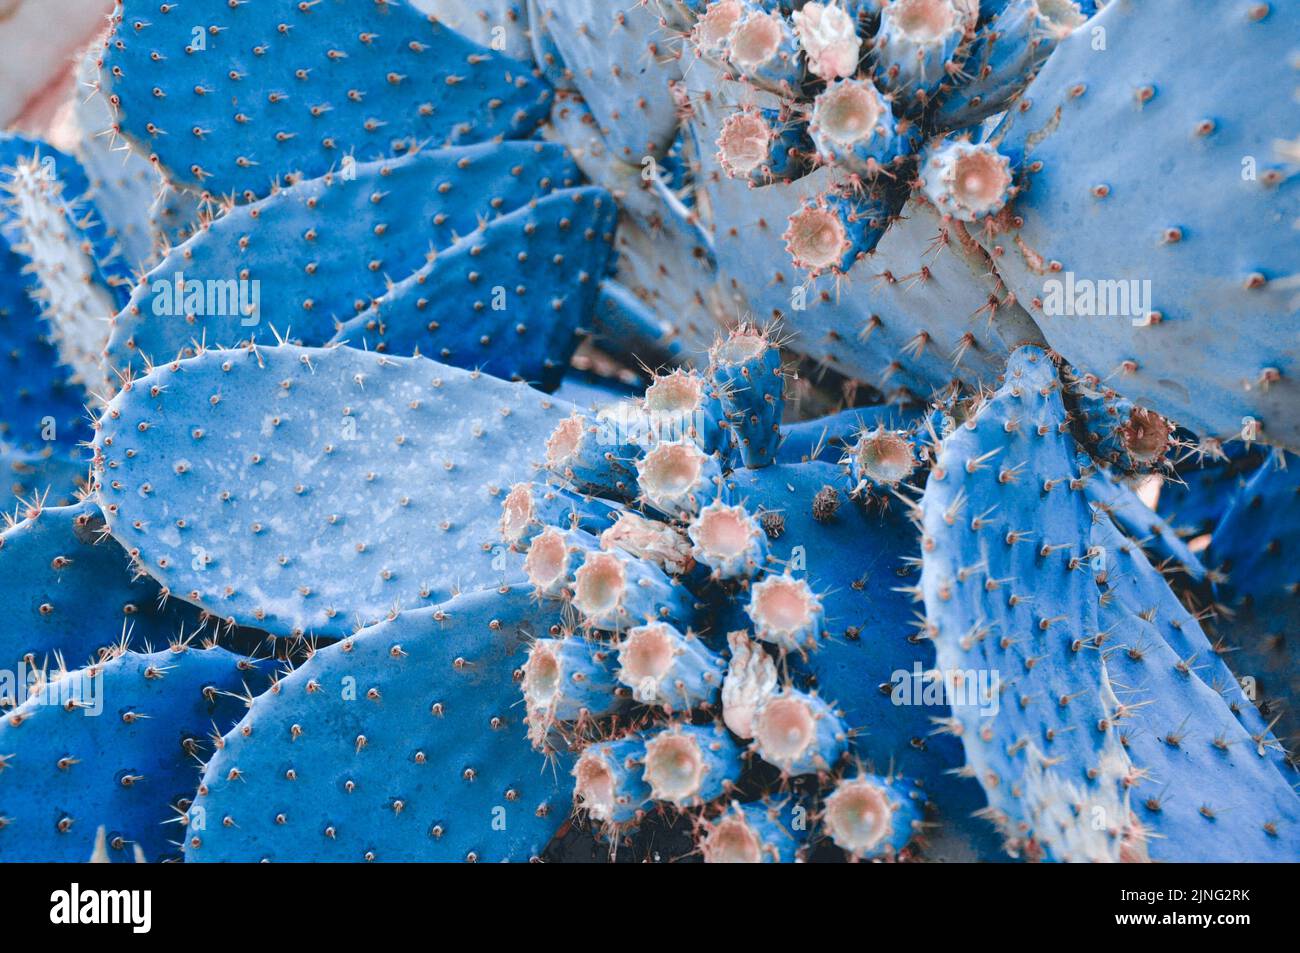 Fashion blue colored Cactus. Trendy tropical cacti plant close-up. Art Concept. Creative fashionable style. Sweet neon cacti summer mood. Surrealism Stock Photo